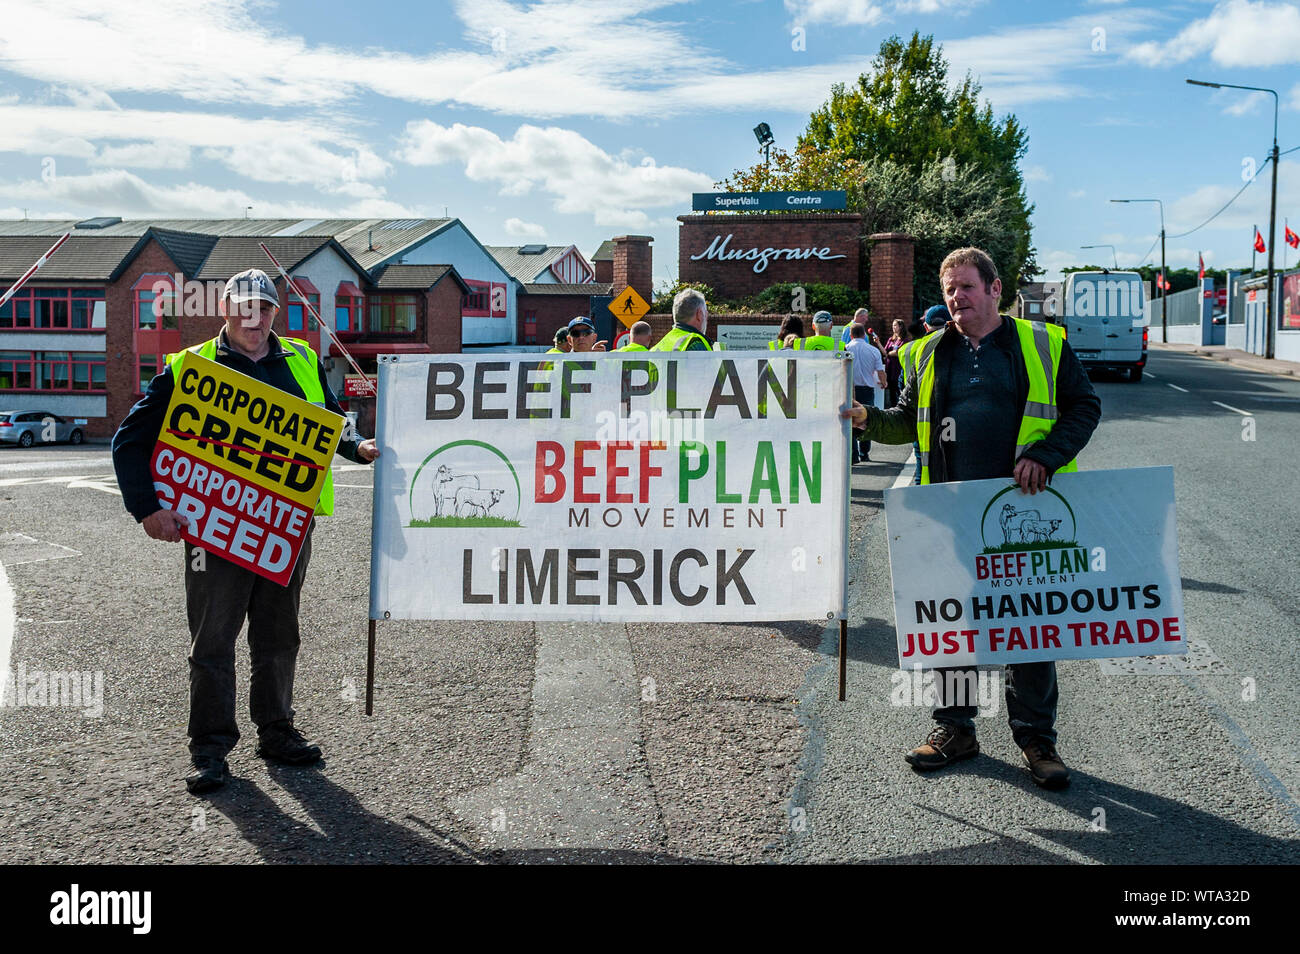 Cork, Ireland. 11th Sept, 2019. Farmers started a lightning picket outside Musgrave's Distribution Centre on Tramore Road this afternoon.  Farmers say they want the retailers to sit round the table and engage with them regarding the price per KG for their beef, something which the retailers have so far refused to do. Farmers came from as far away as County Limerick to join the protest. Credit: AG News/Alamy Live News. Stock Photo